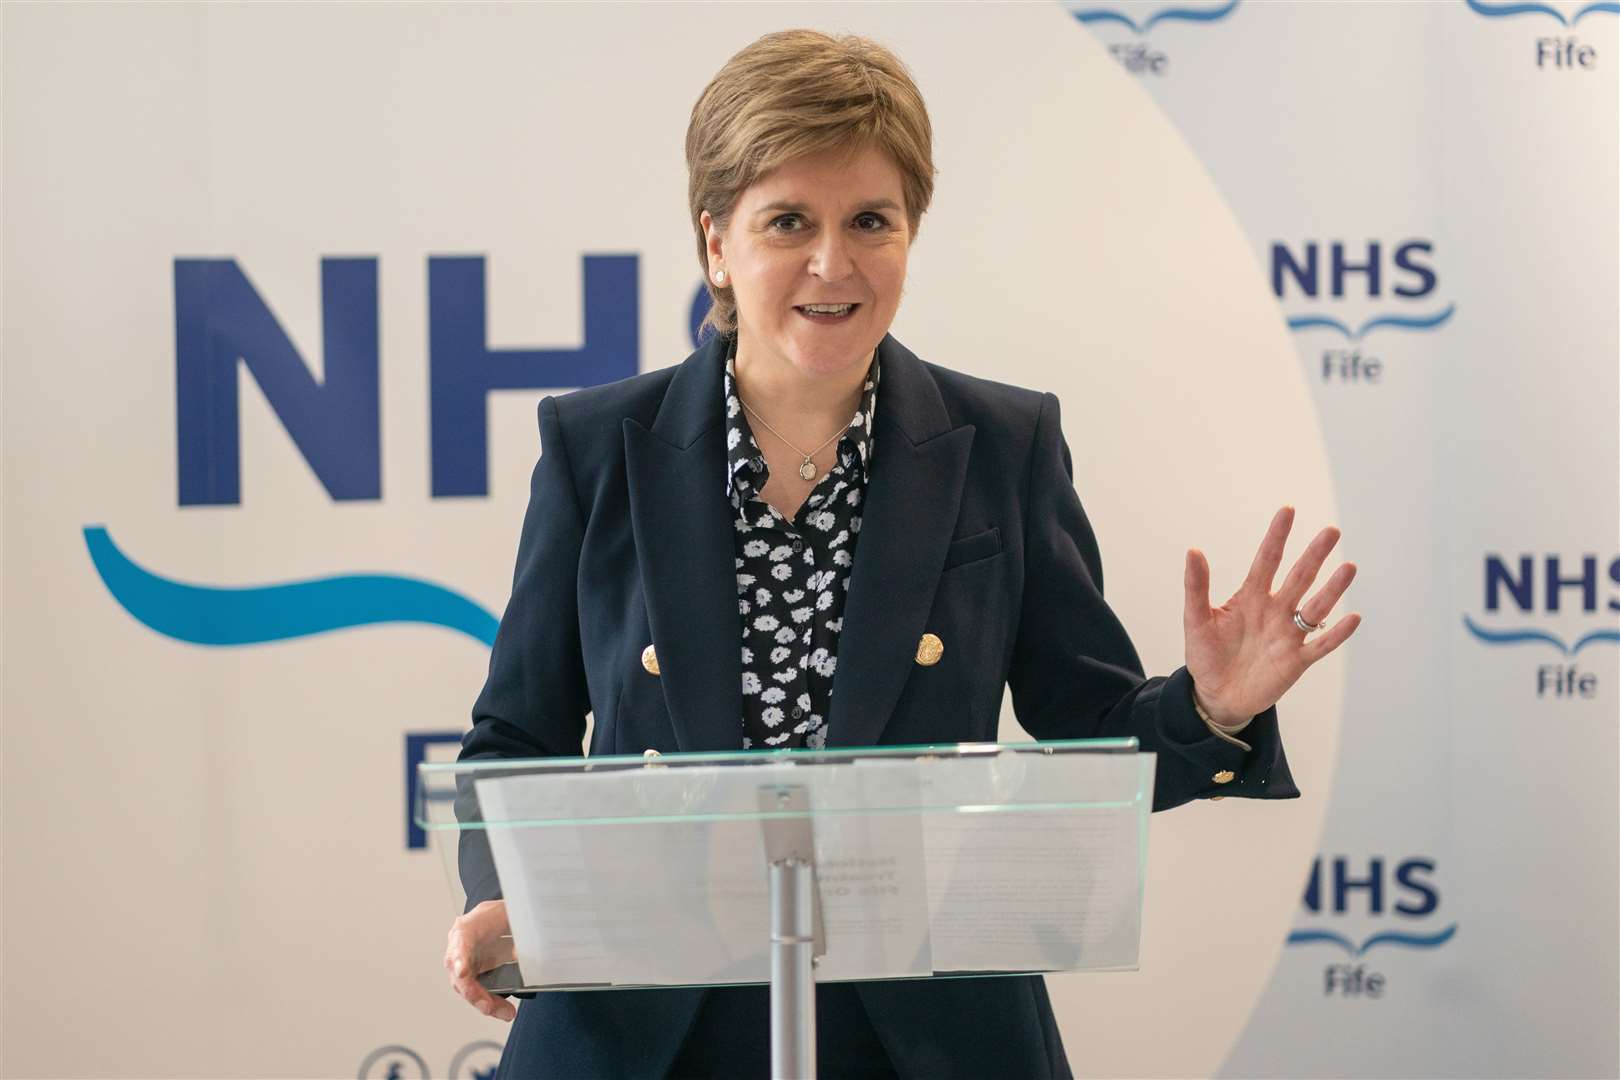 First Minister Nicola Sturgeon had left the health service and education ‘in a worse position than she found them’, Scottish Liberal Democrats leader Alex Cole-Hamilton said (Peter Summers/PA)